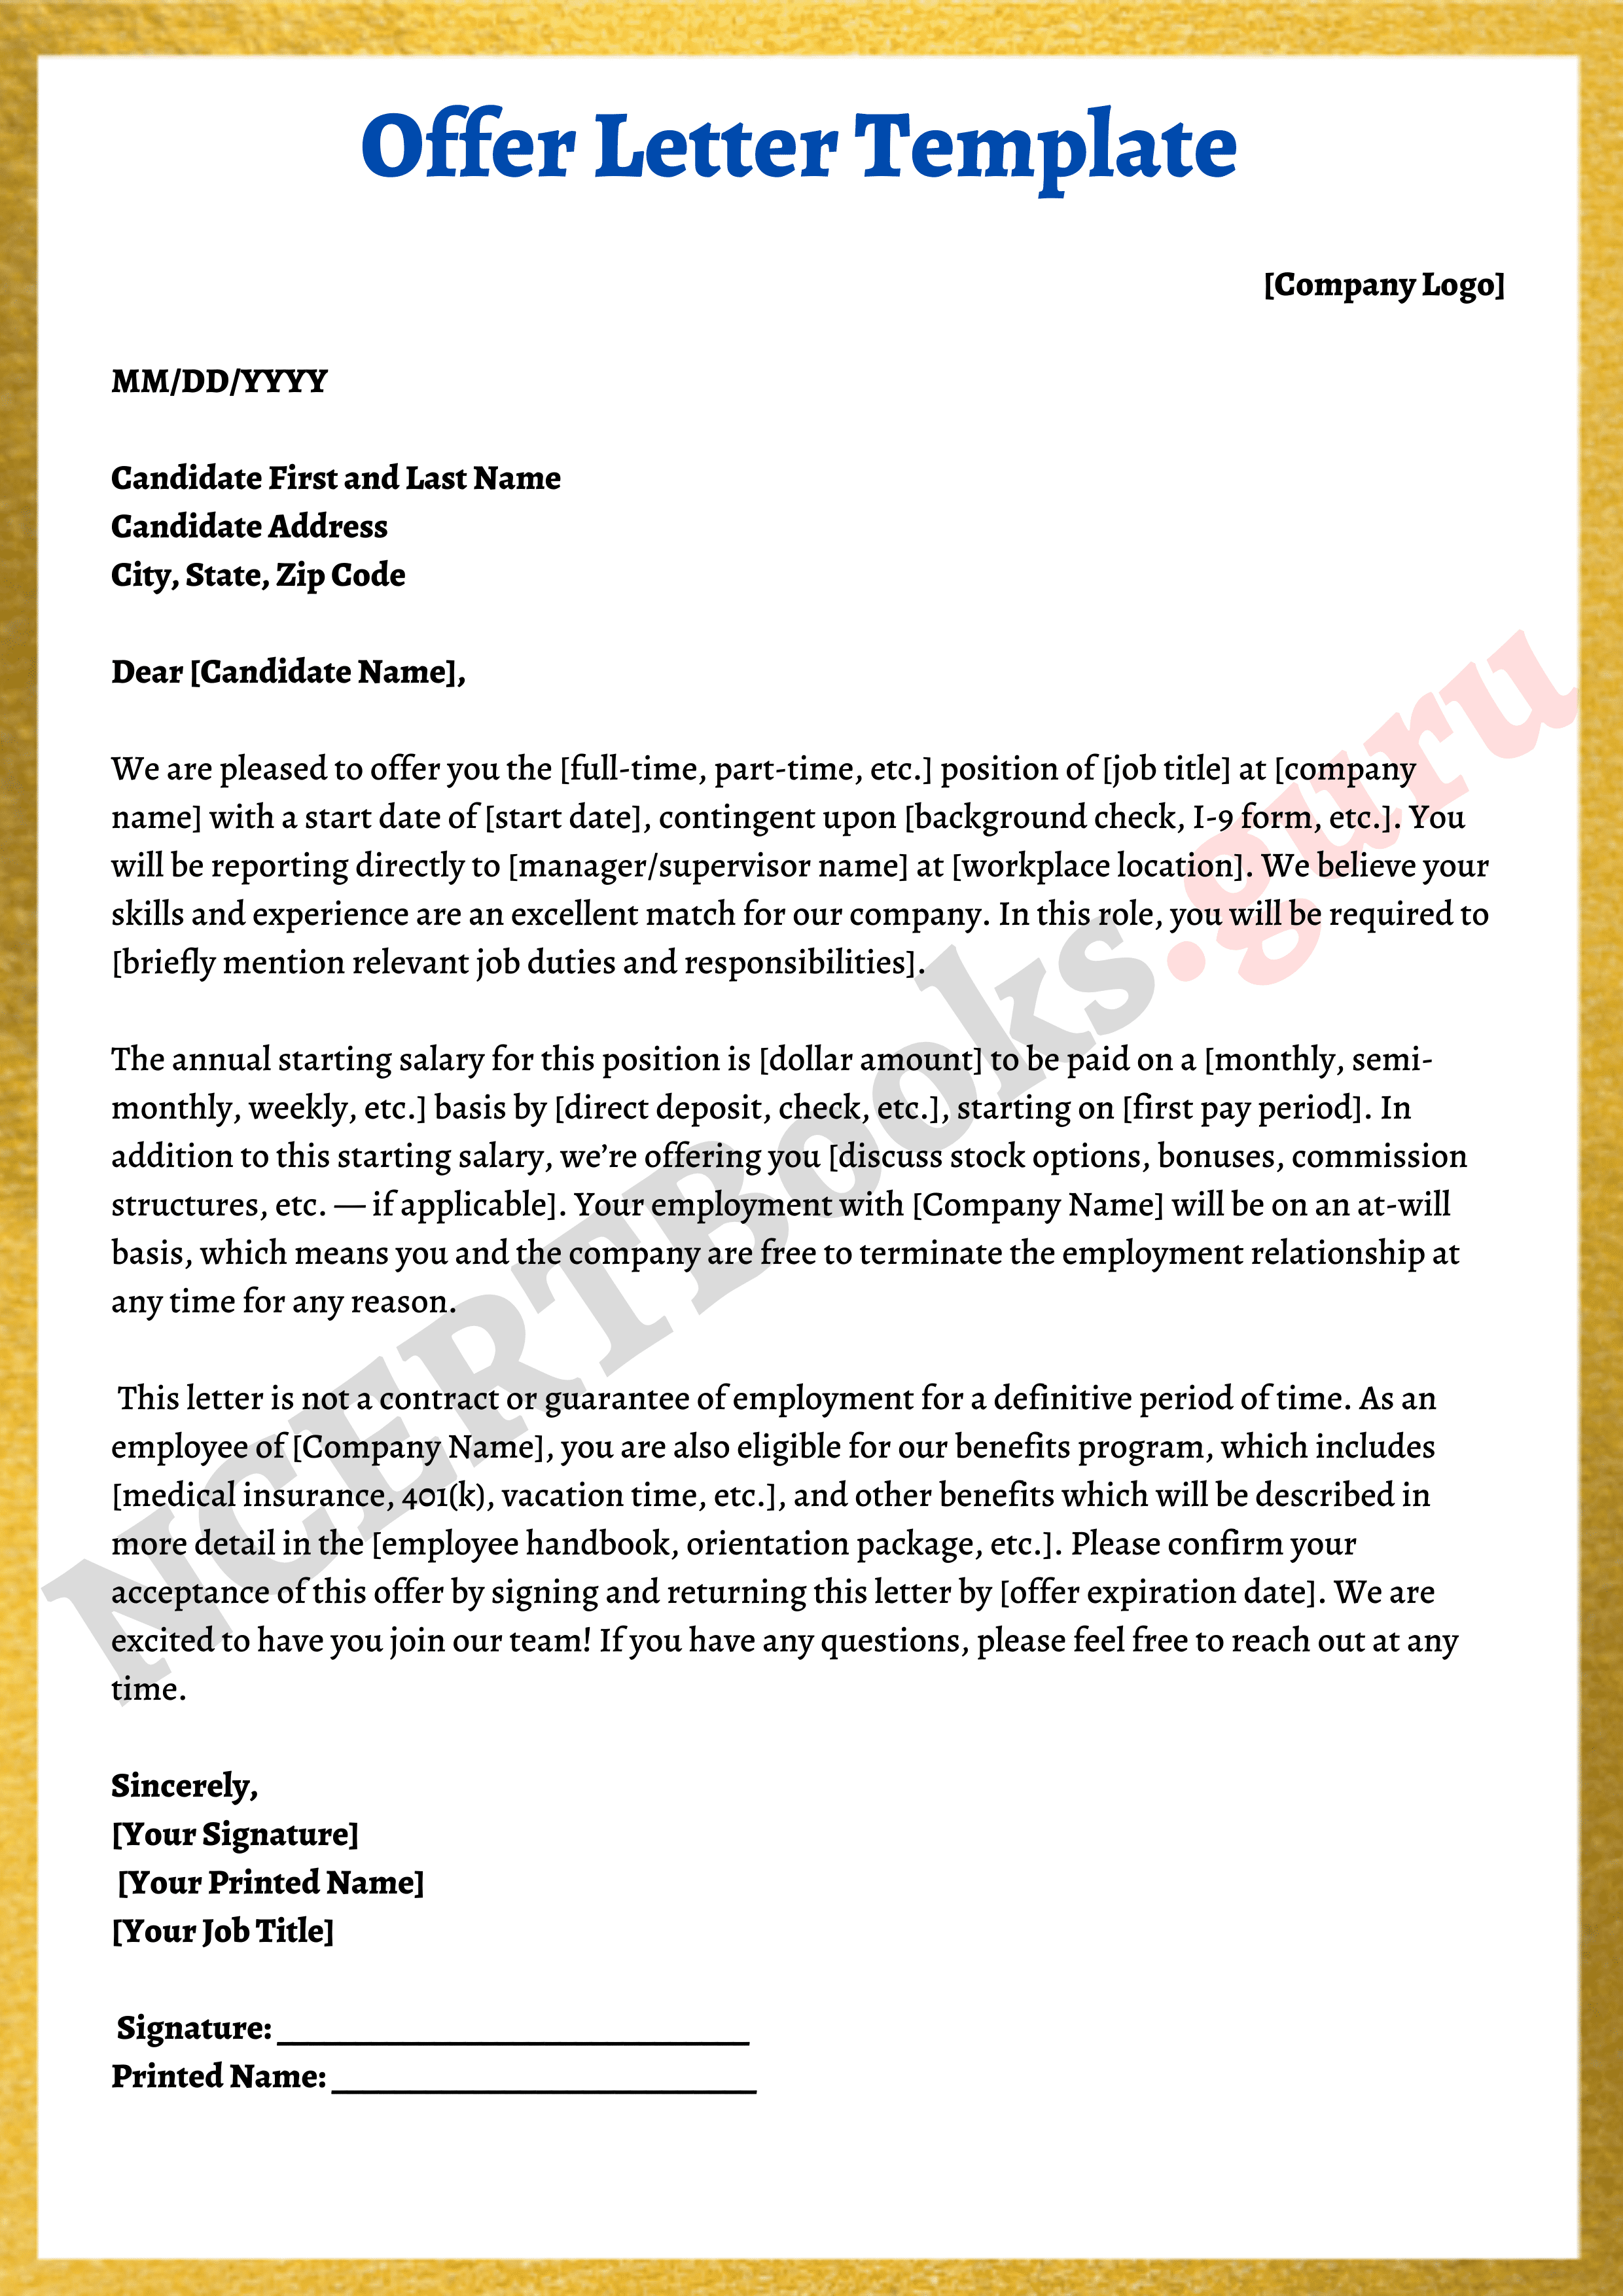 Free Offer Letter Format Samples Tips on How to Write an Offer Letter?